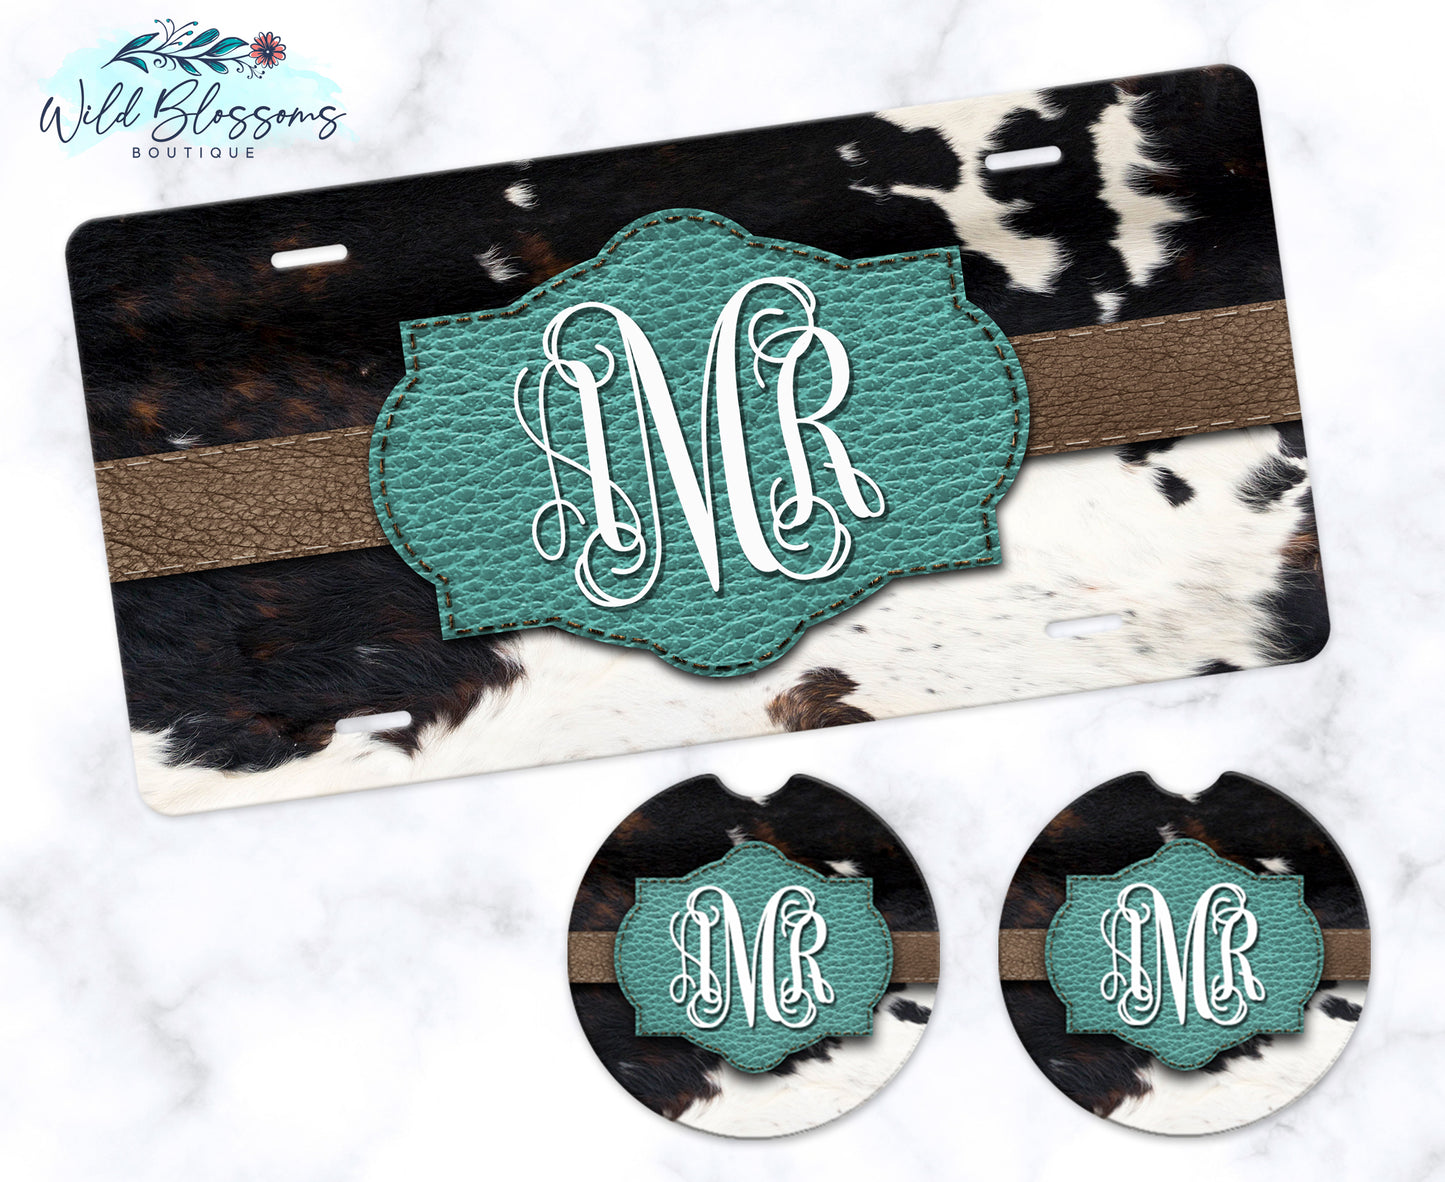 Turquoise Cow Print License Plate